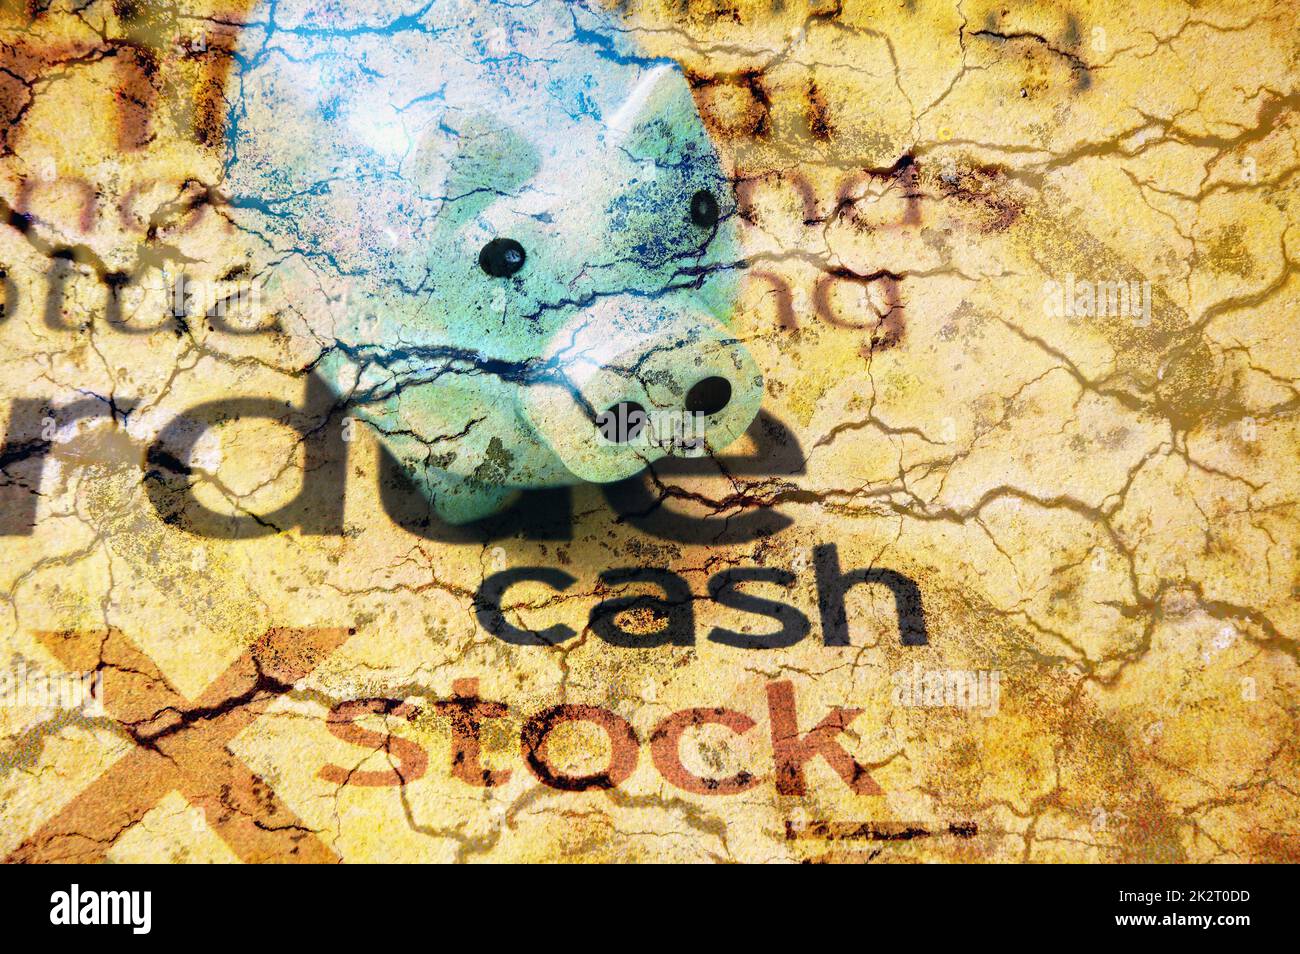 Piggy bank and cash stock concept Stock Photo